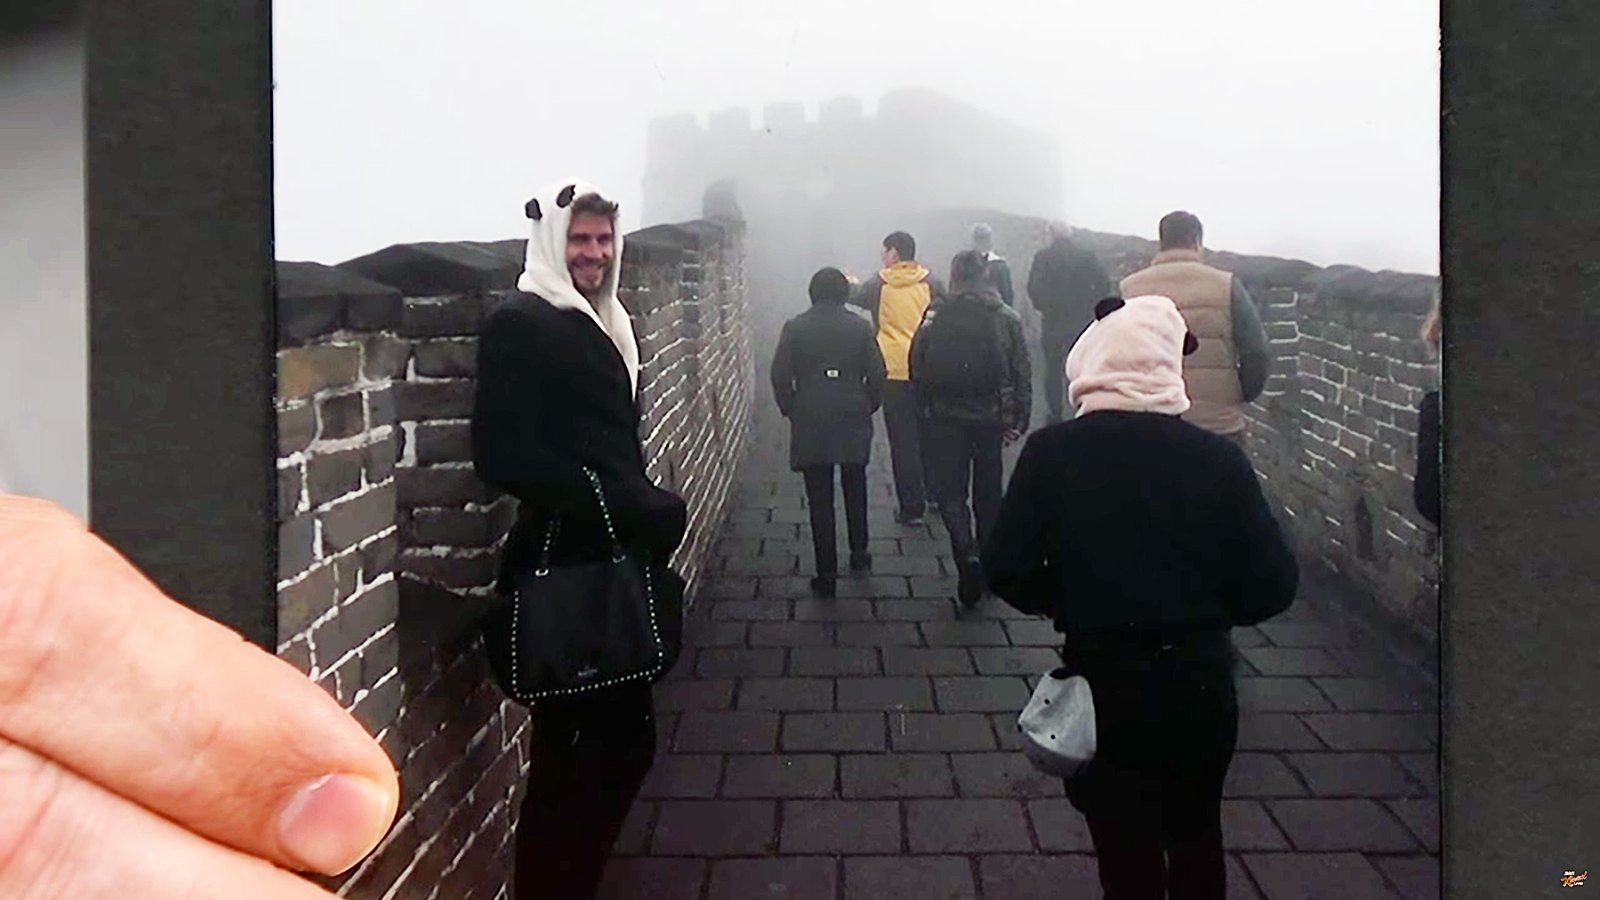 Liam Hemsworth at the Great Wall of China